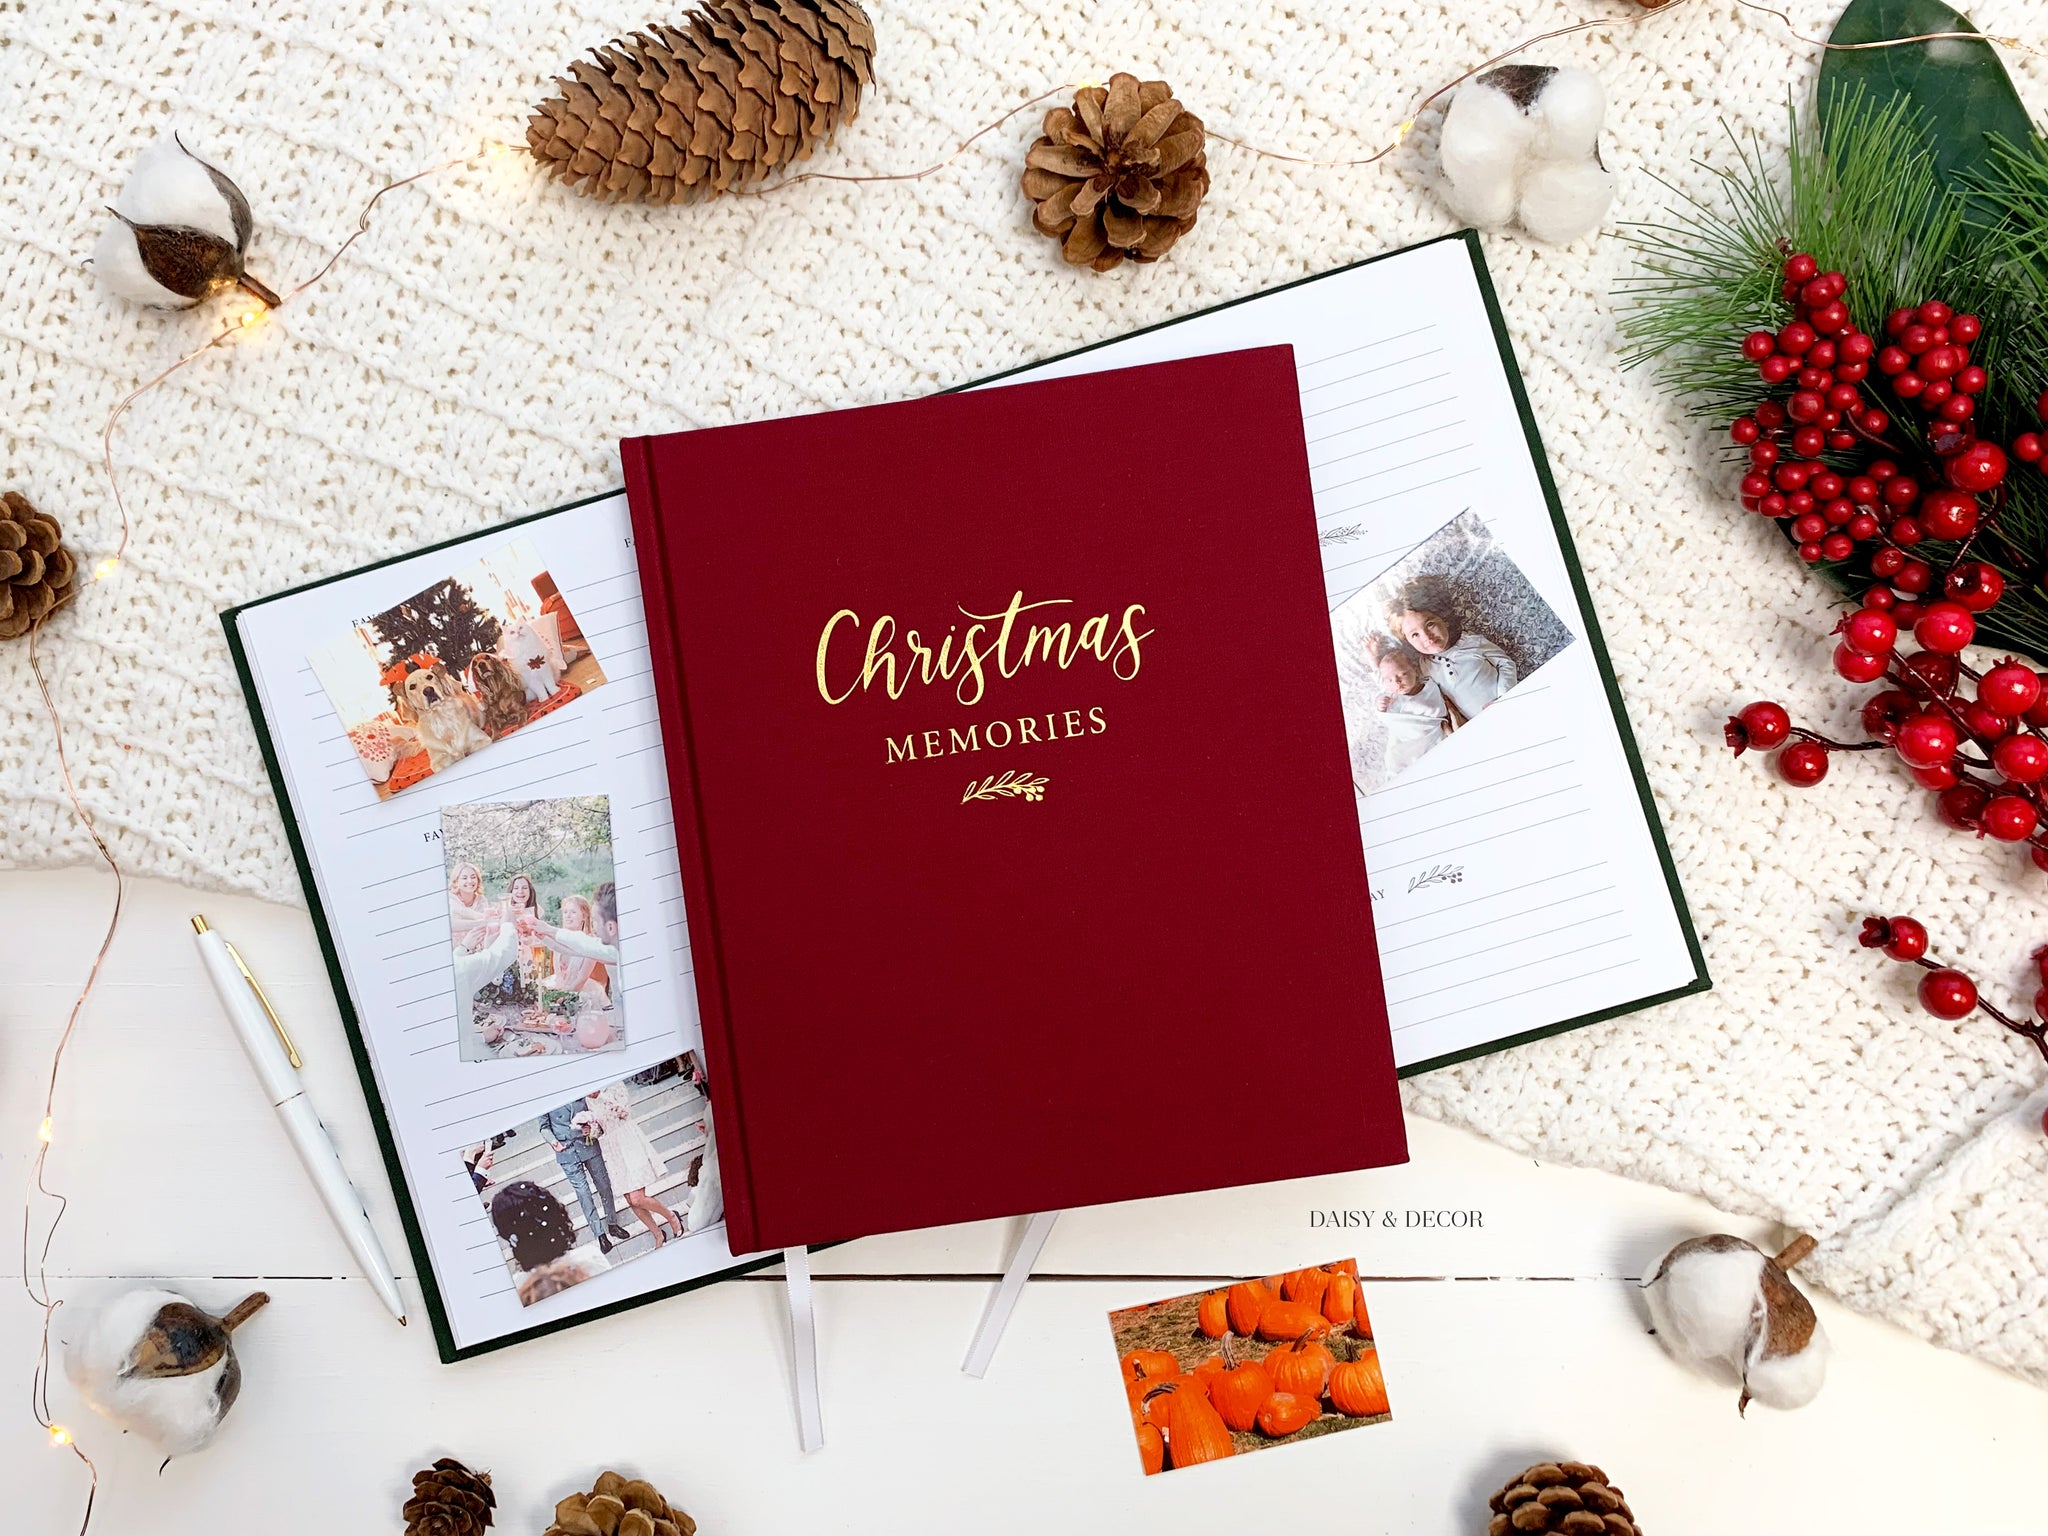 Inspirational Christmas Memory Book - mulberrycottage